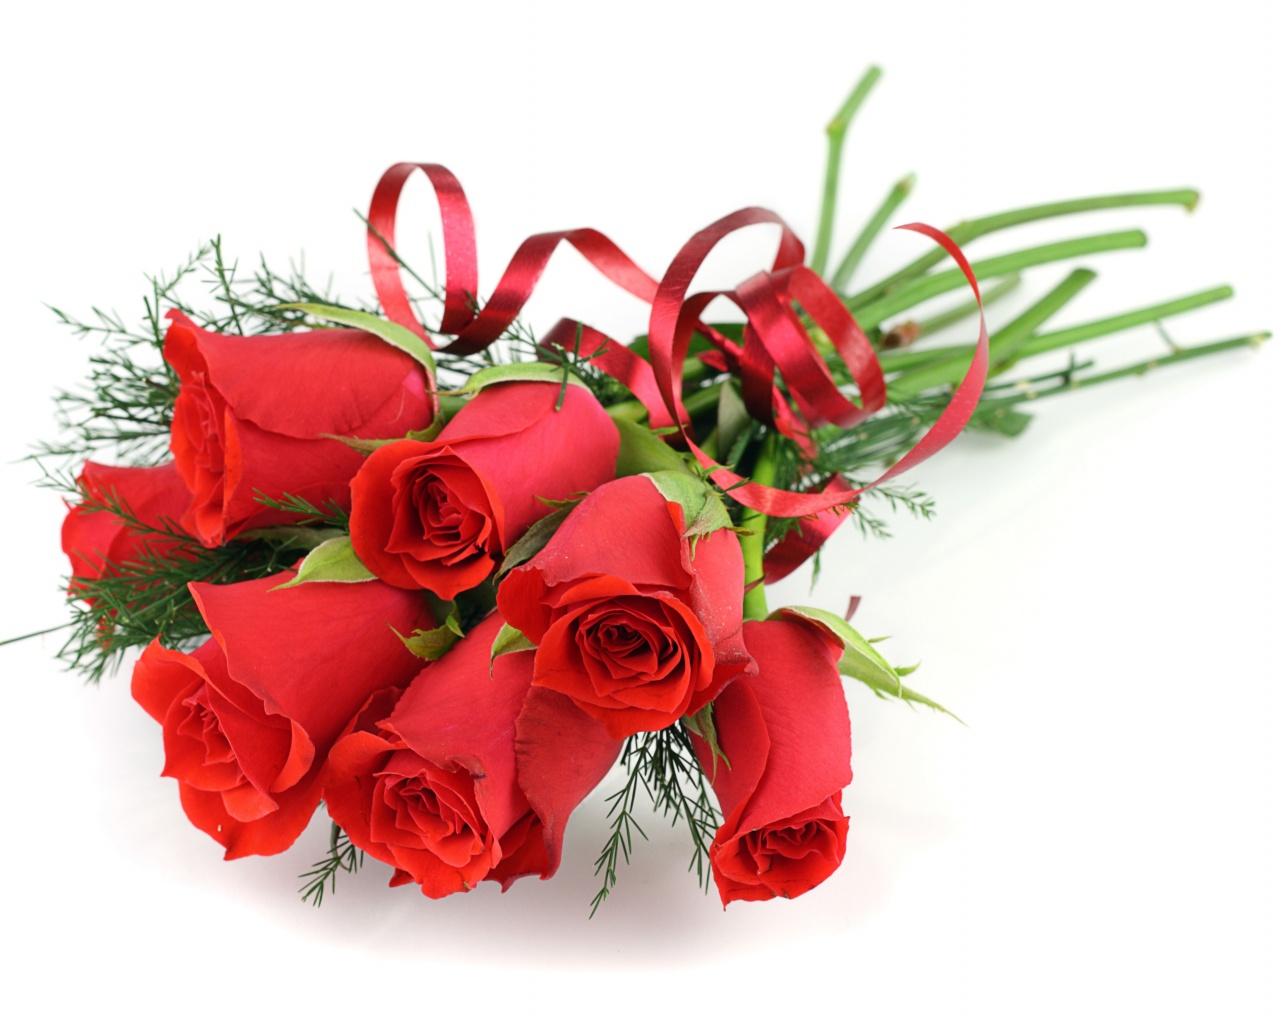 Red Roses For March 8 Womens Day